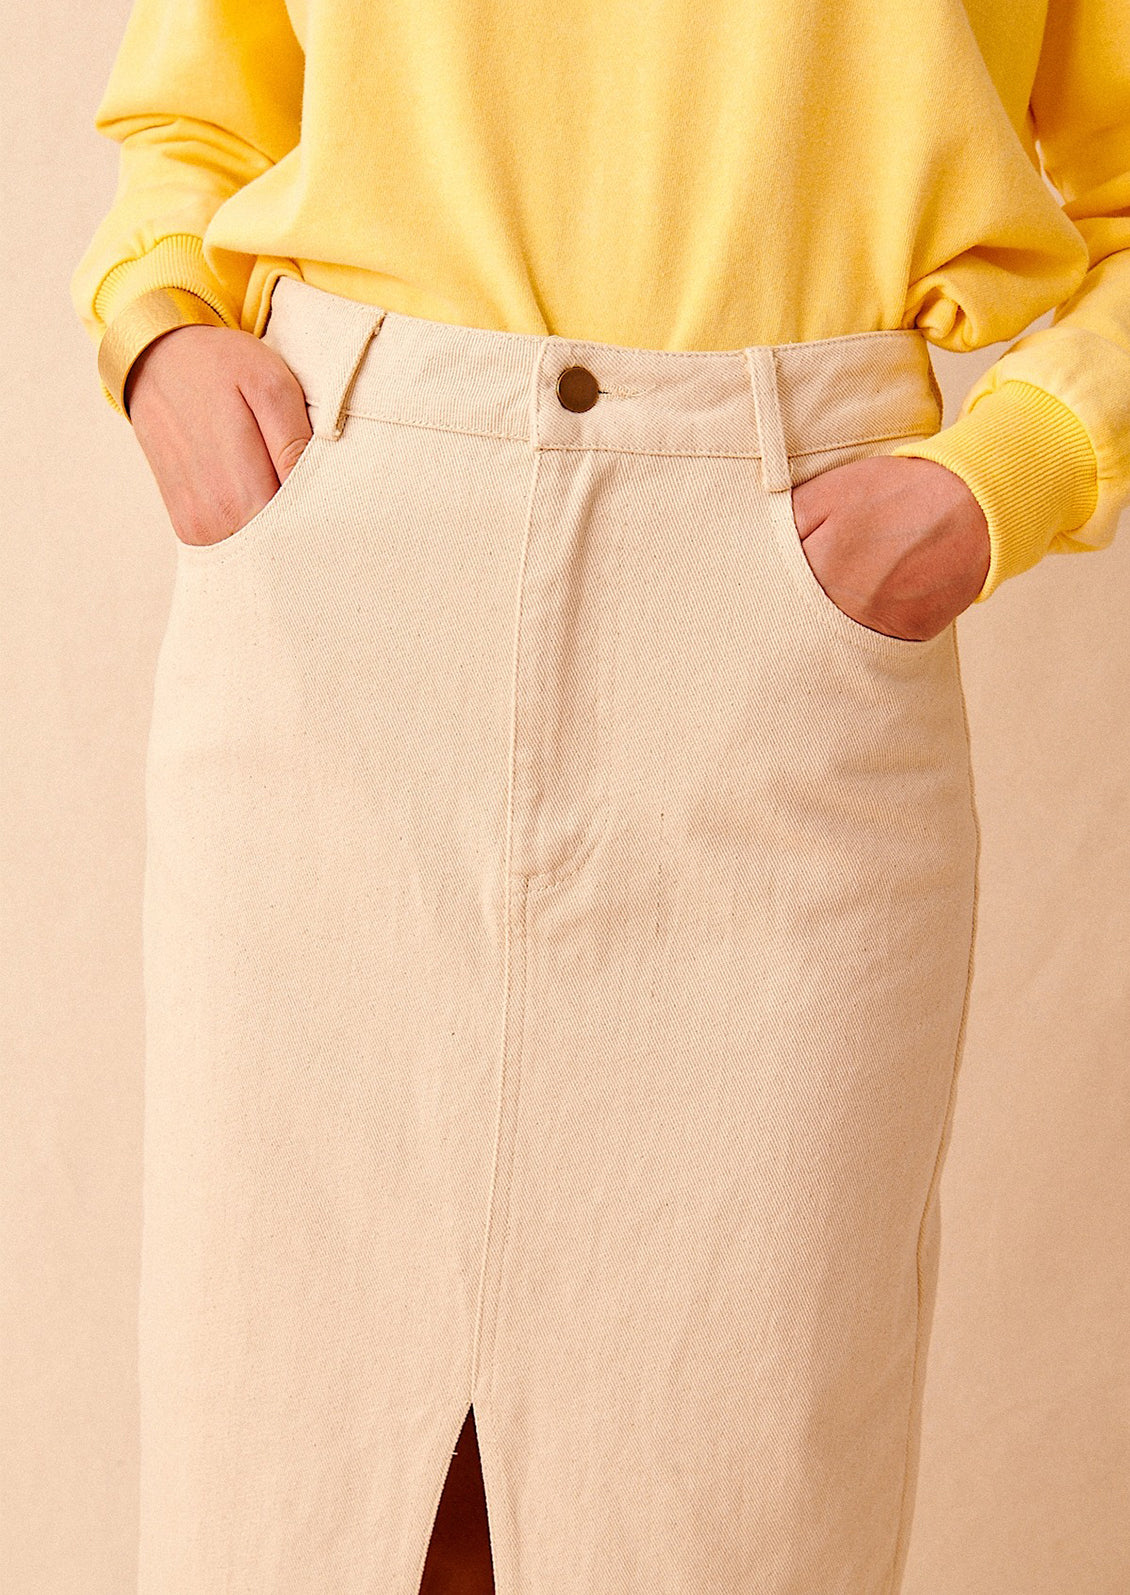 A person wearing a yellow sweatshirt tucked into an ecru denim skirt with their hands in pockets